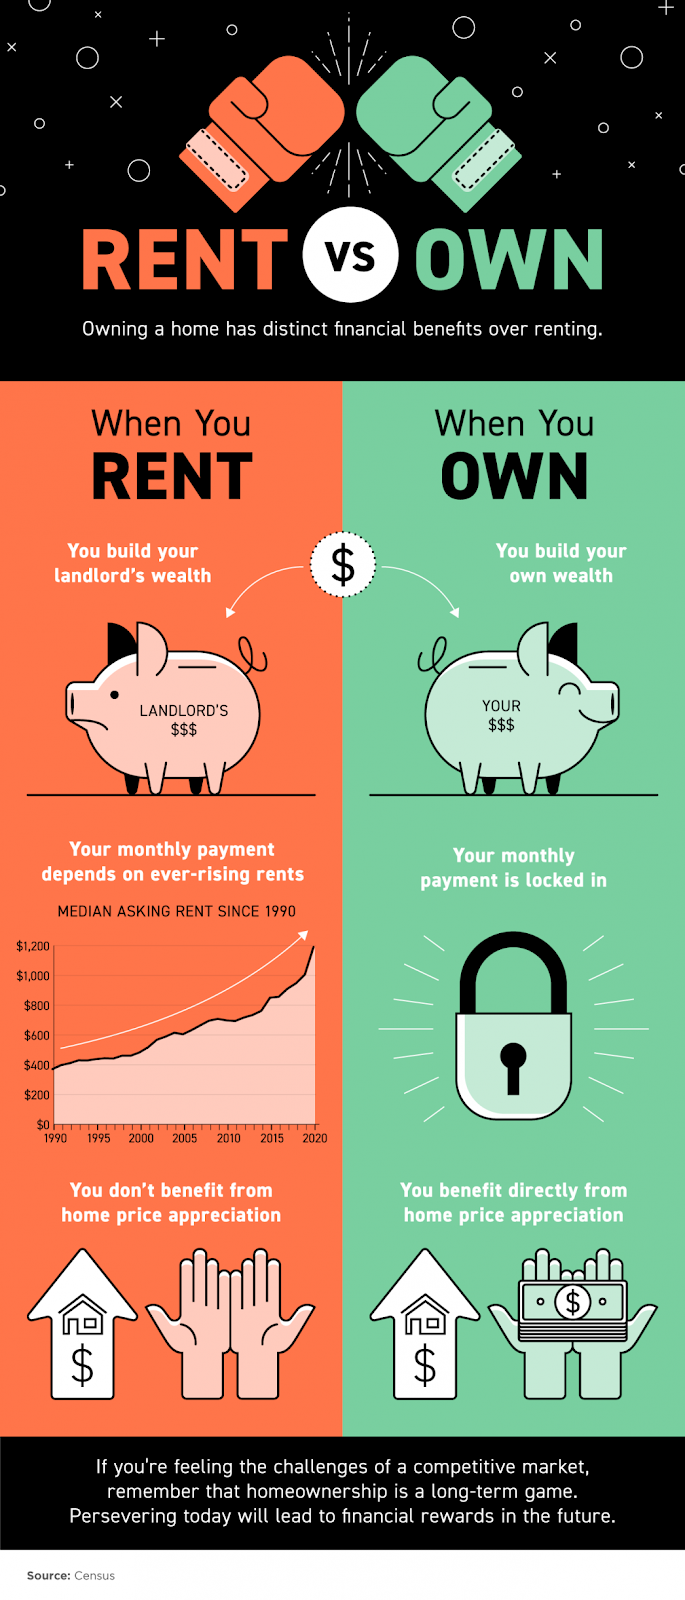 Owning a Home Has Distinct Financial Benefits Over Renting [INFOGRAPHIC] | MyKCM